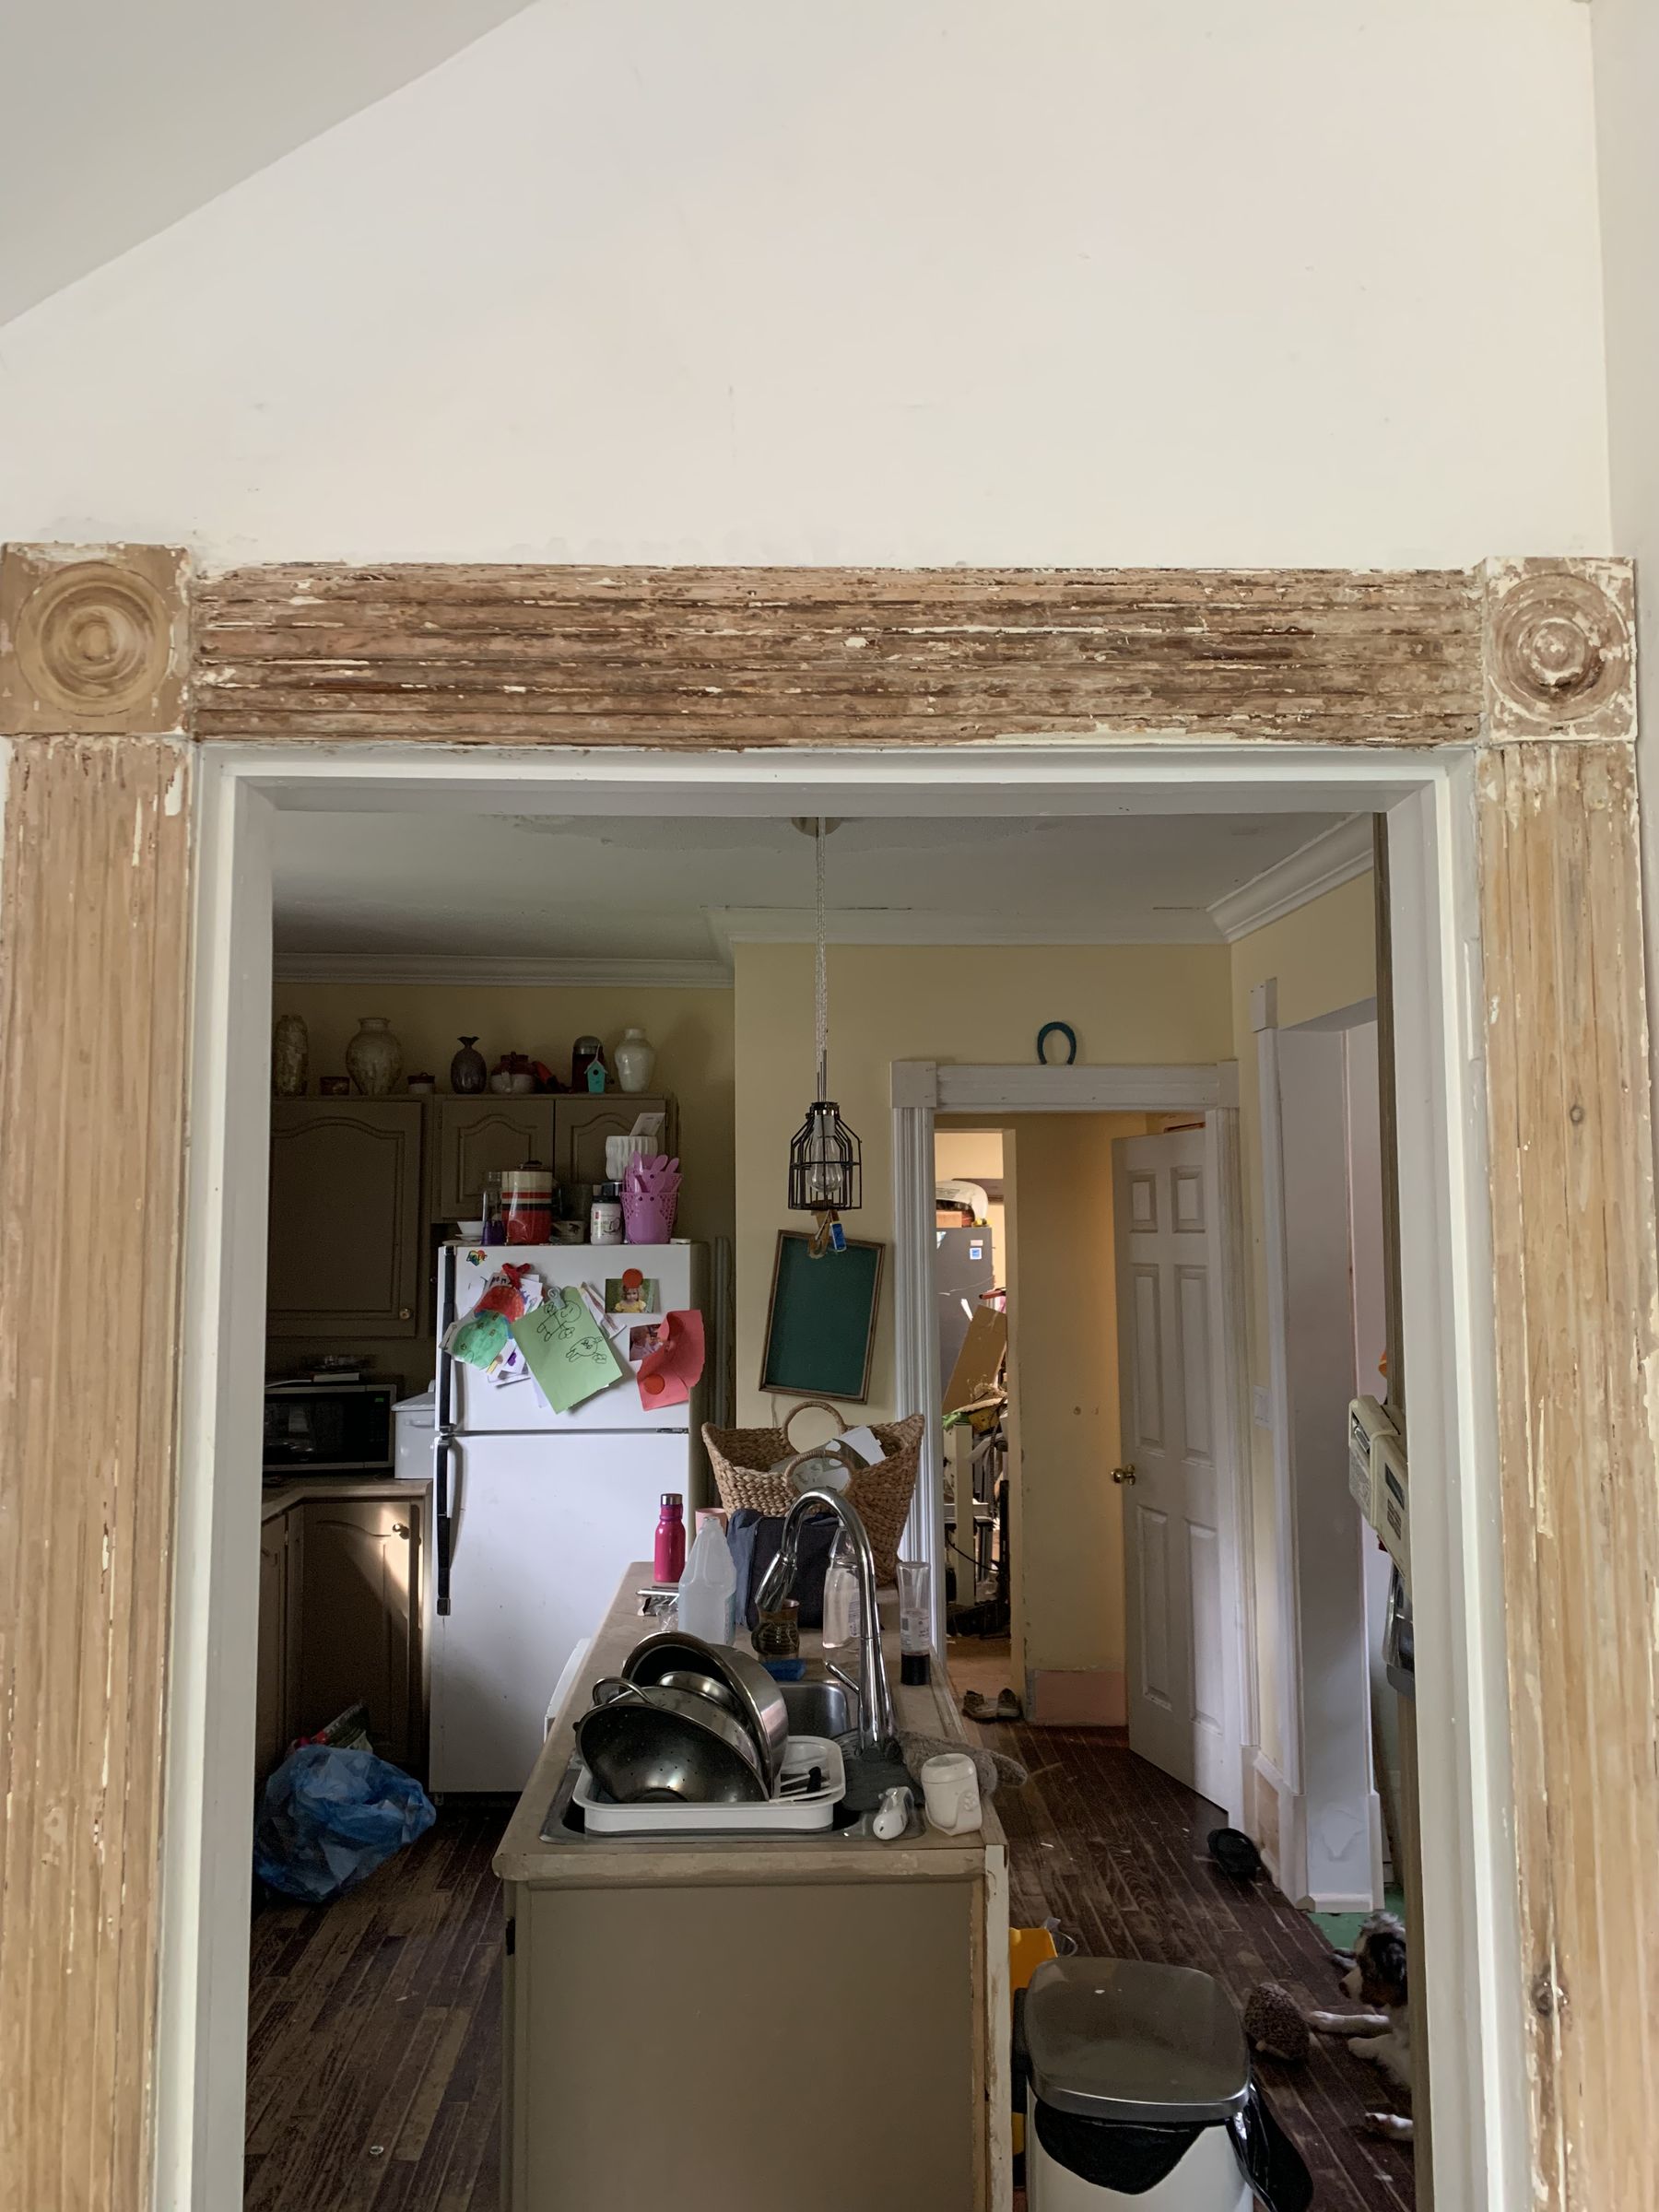 I used Peel Away 1 paint remover on original woodwork and it ended up  removing some of the drywall/plaster as well. Any advice on how to fix  this? TIA! : r/Oldhouses